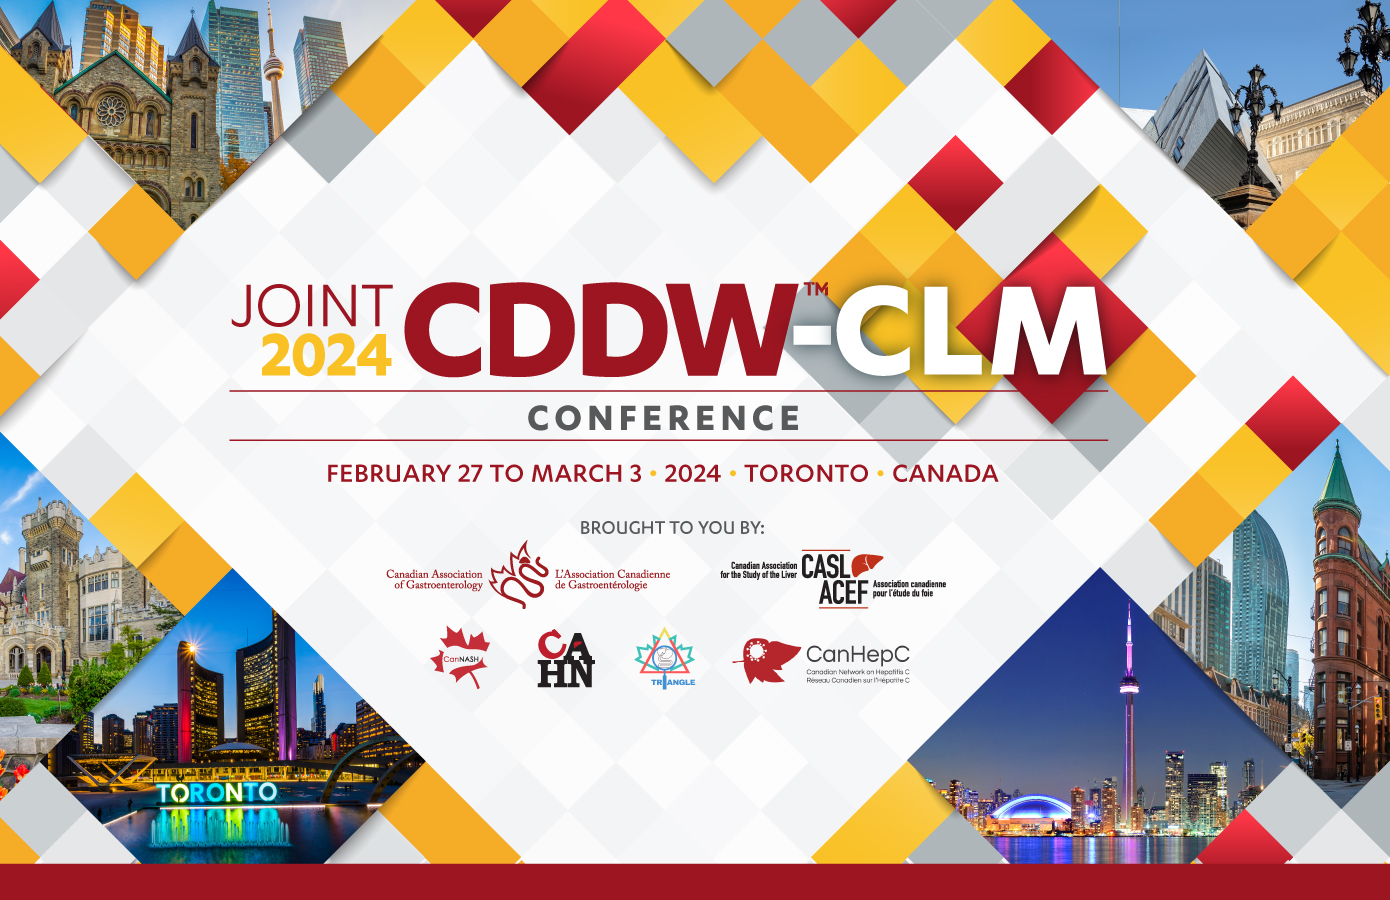 Joint CDDW™CLM Conference 2024 EASLThe Home of Hepatology.